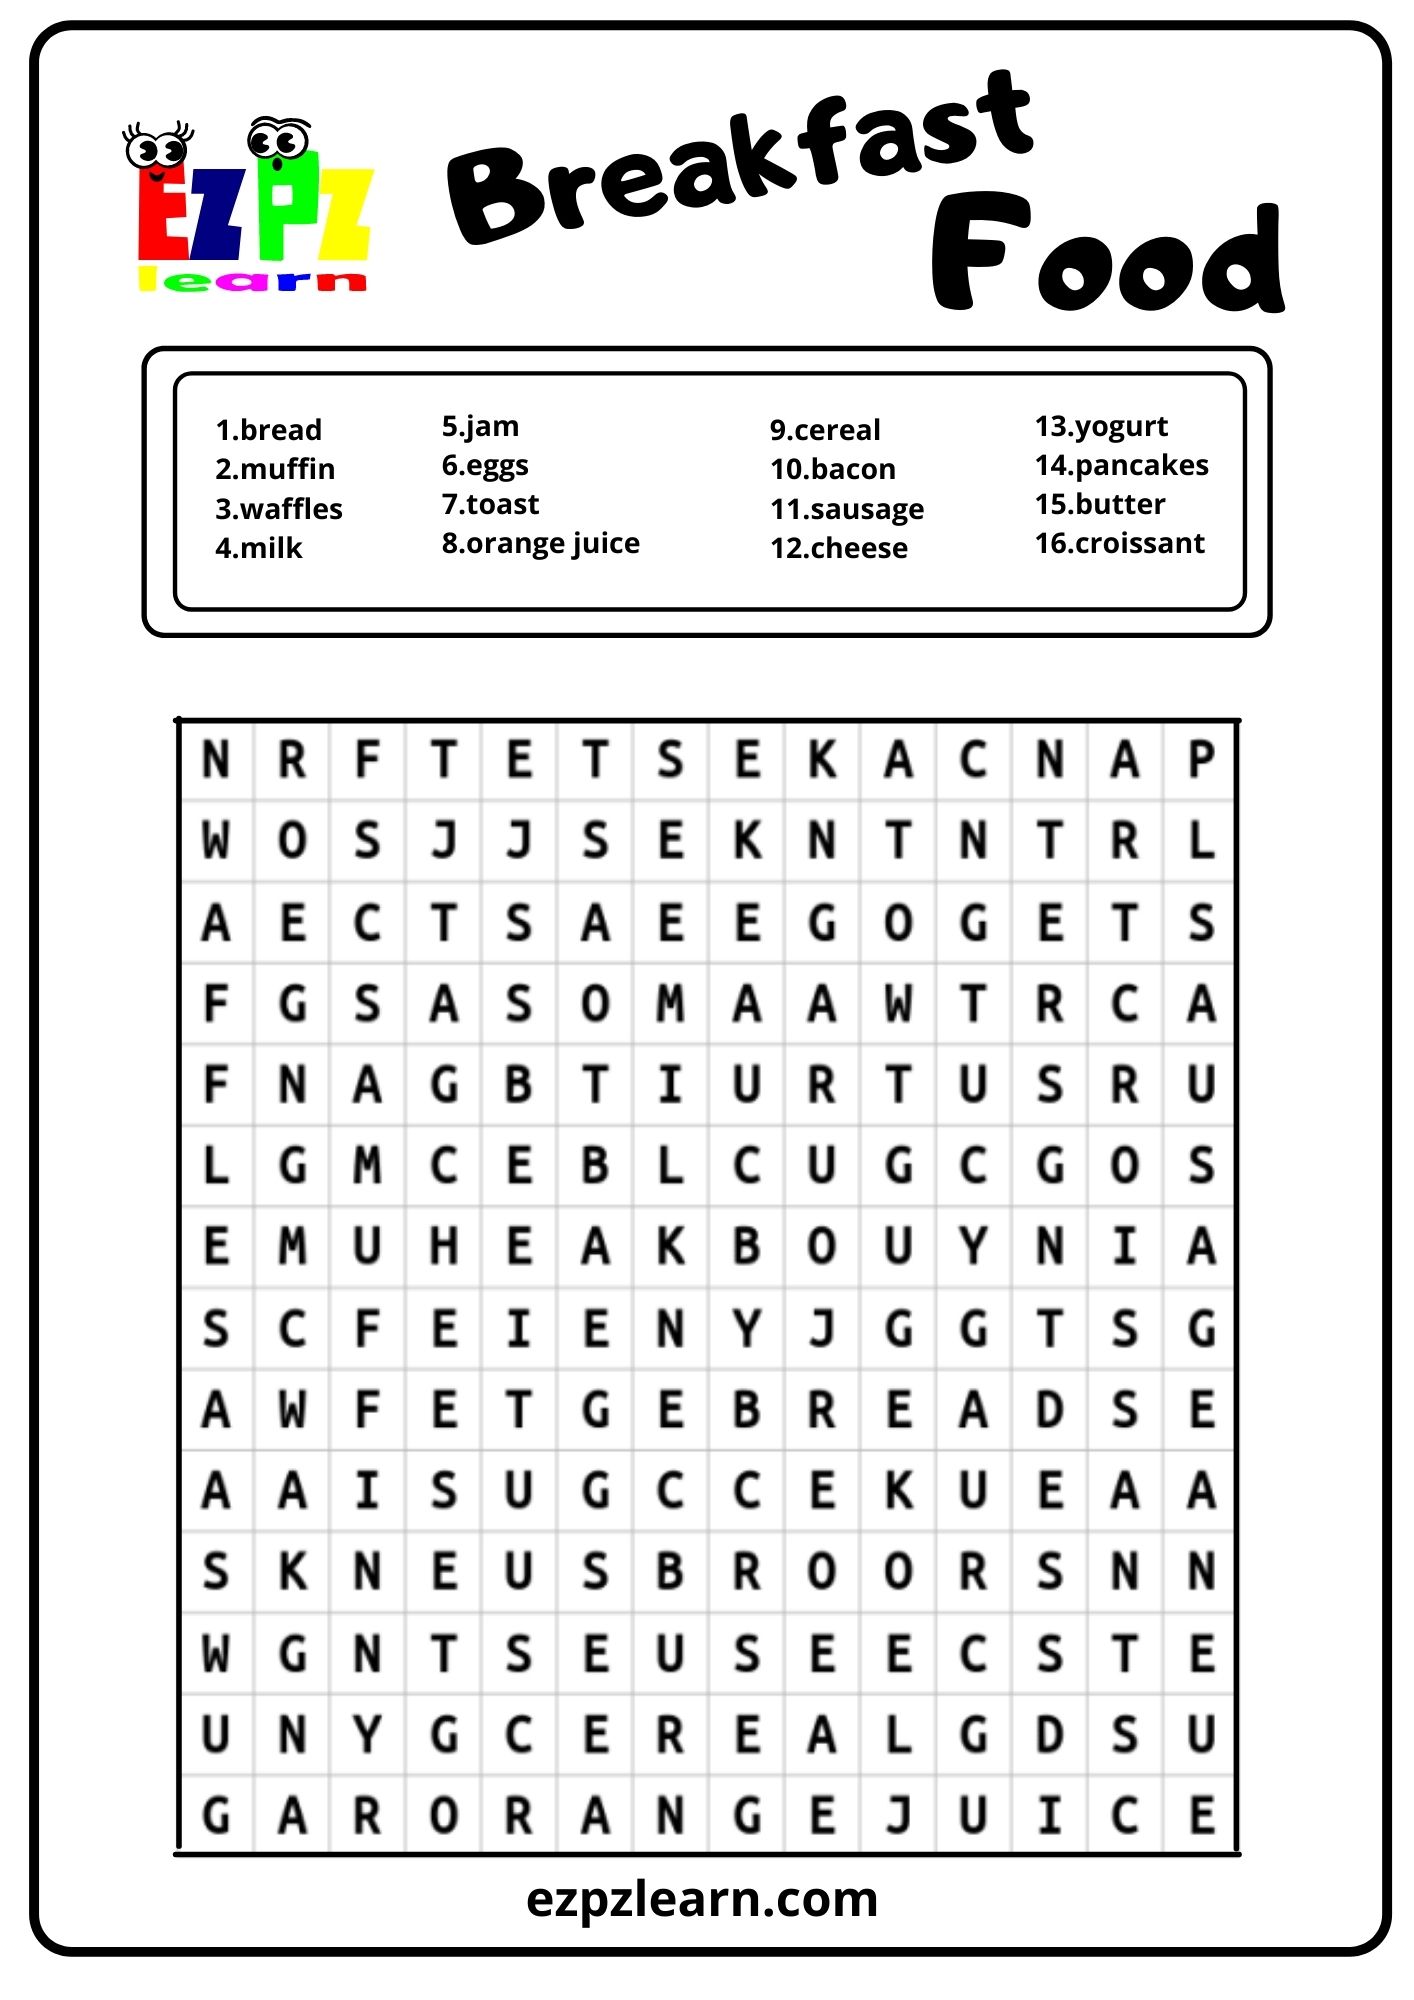 Breakfast Food Word Search 22 - Ezpzlearn.com For Word Sleuth Template